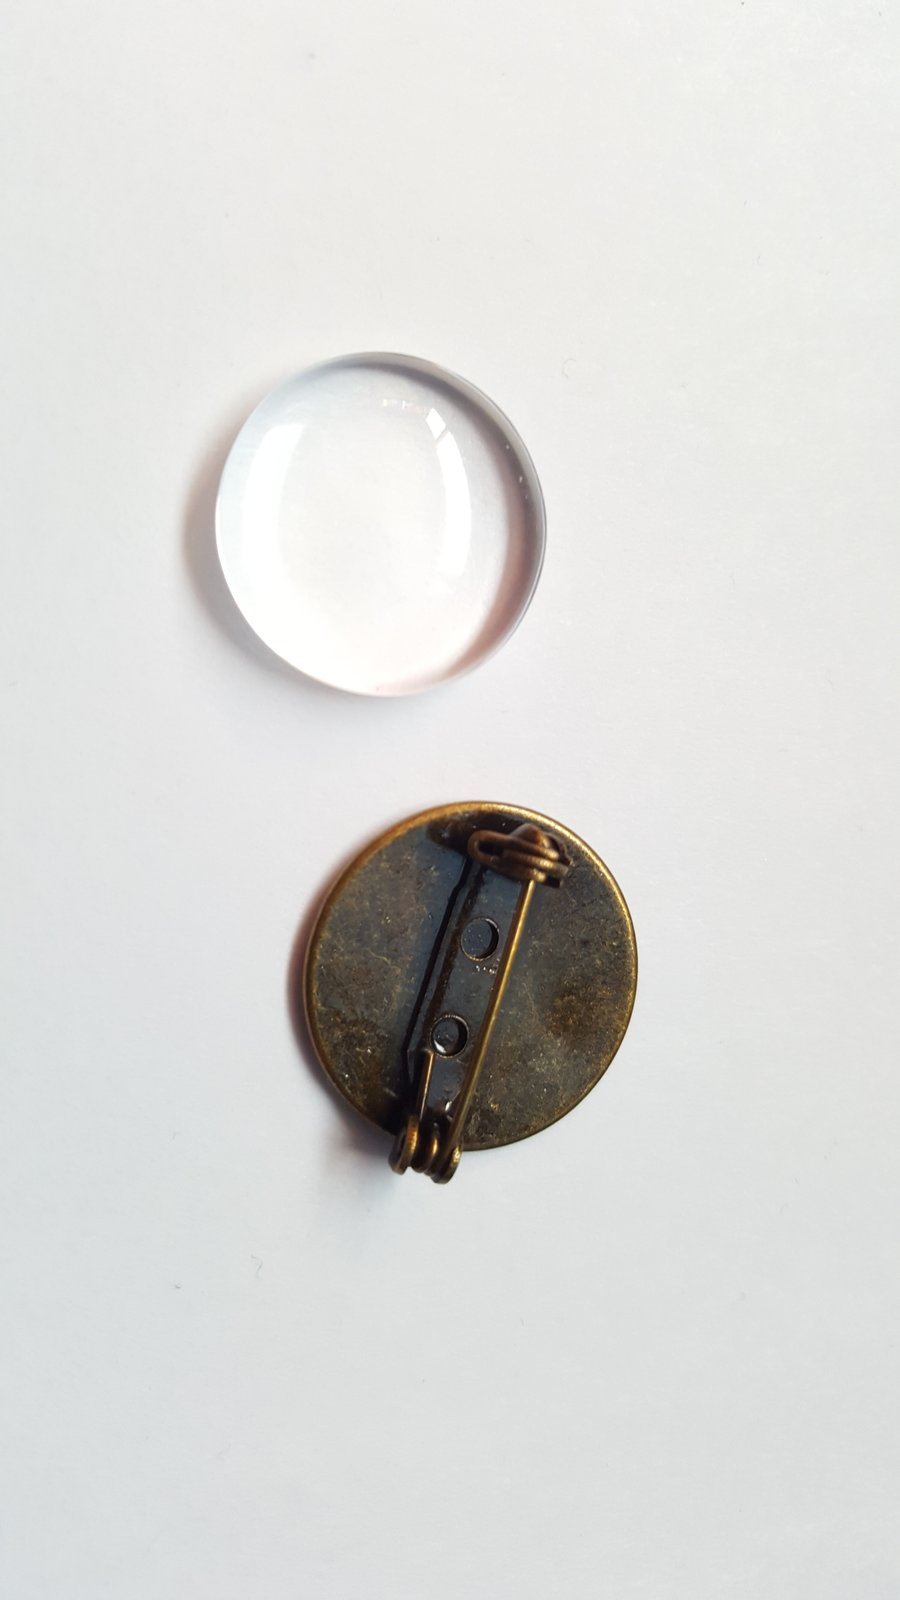 5 x Blank Cabochon Brooch Pin Settings - 22mm - Round - Antique Bronze 